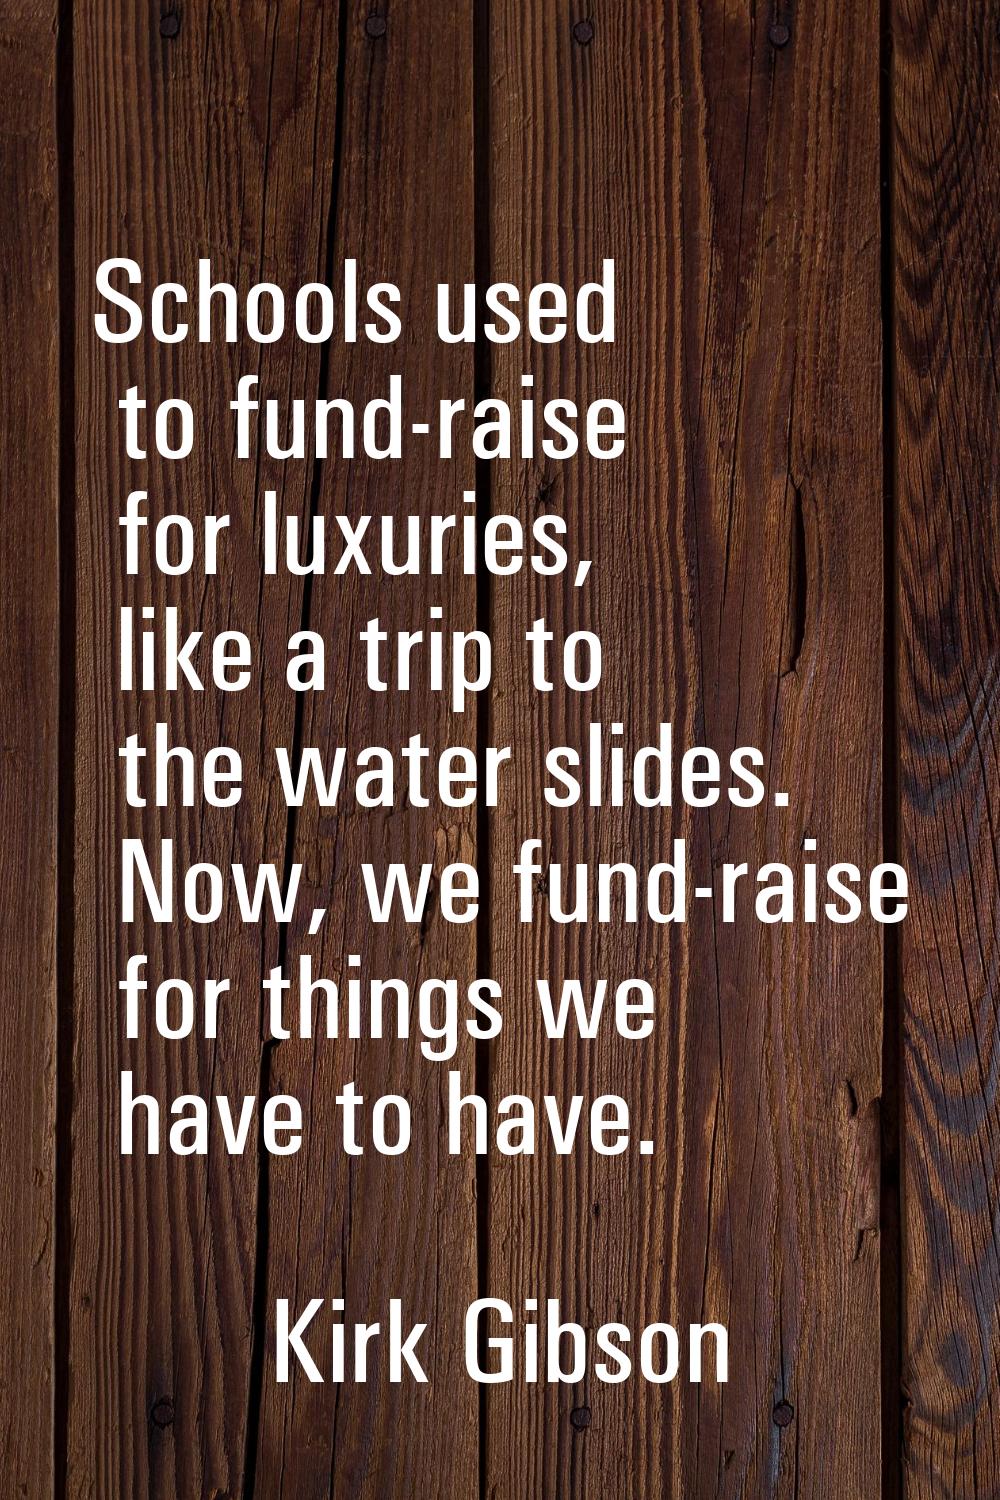 Schools used to fund-raise for luxuries, like a trip to the water slides. Now, we fund-raise for th